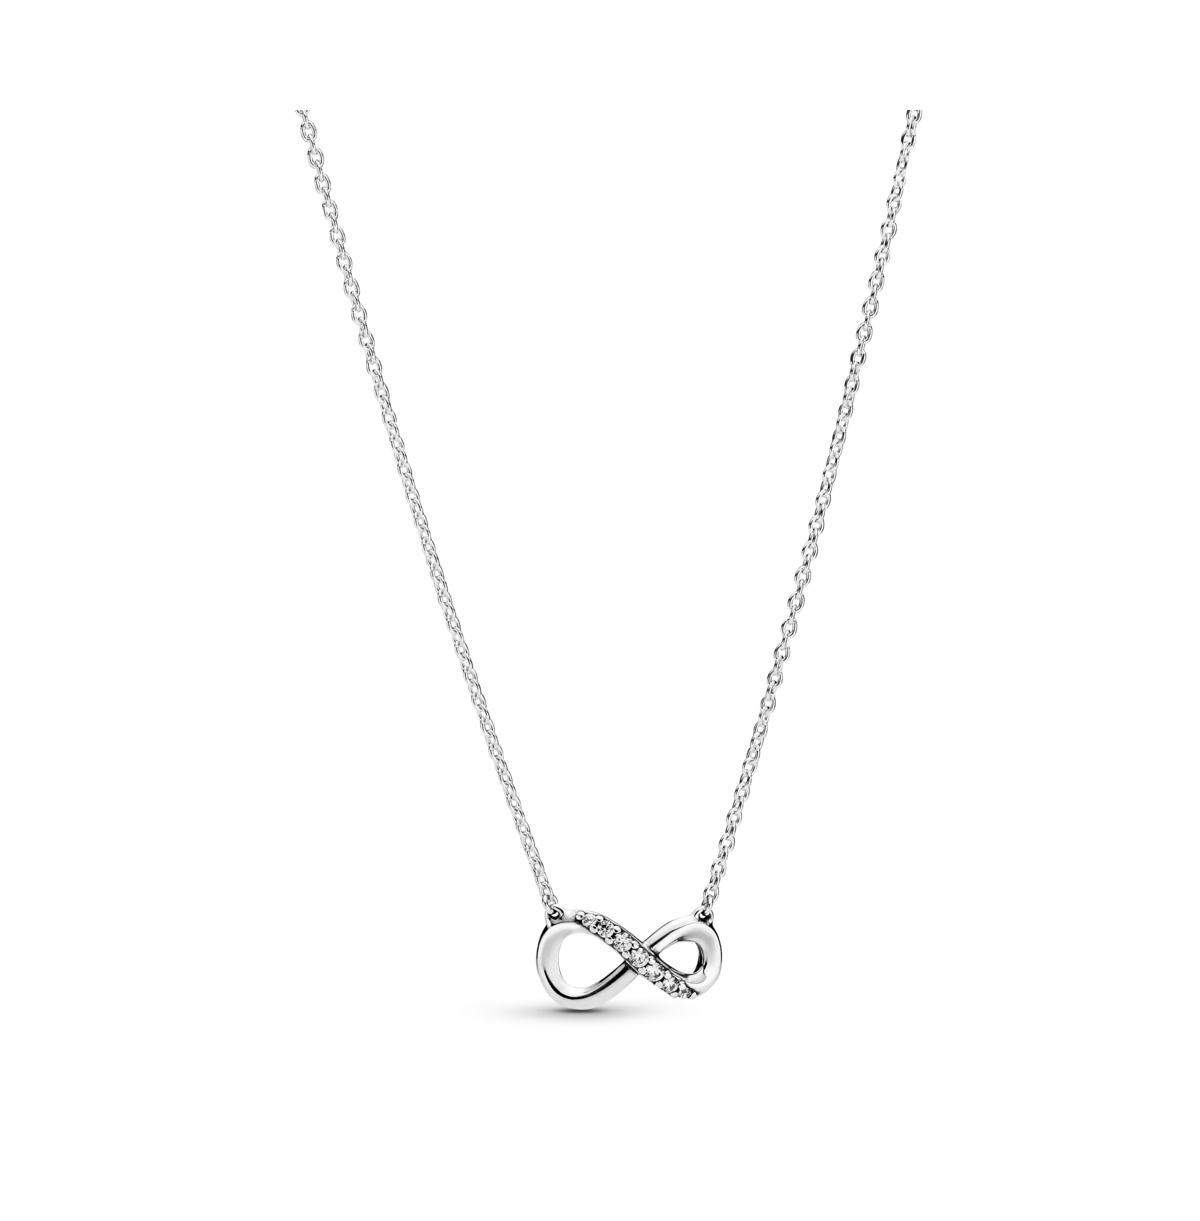 Pandora Moments Sterling Silver Sparkling Cubic Zirconia Infinity Collier Necklace